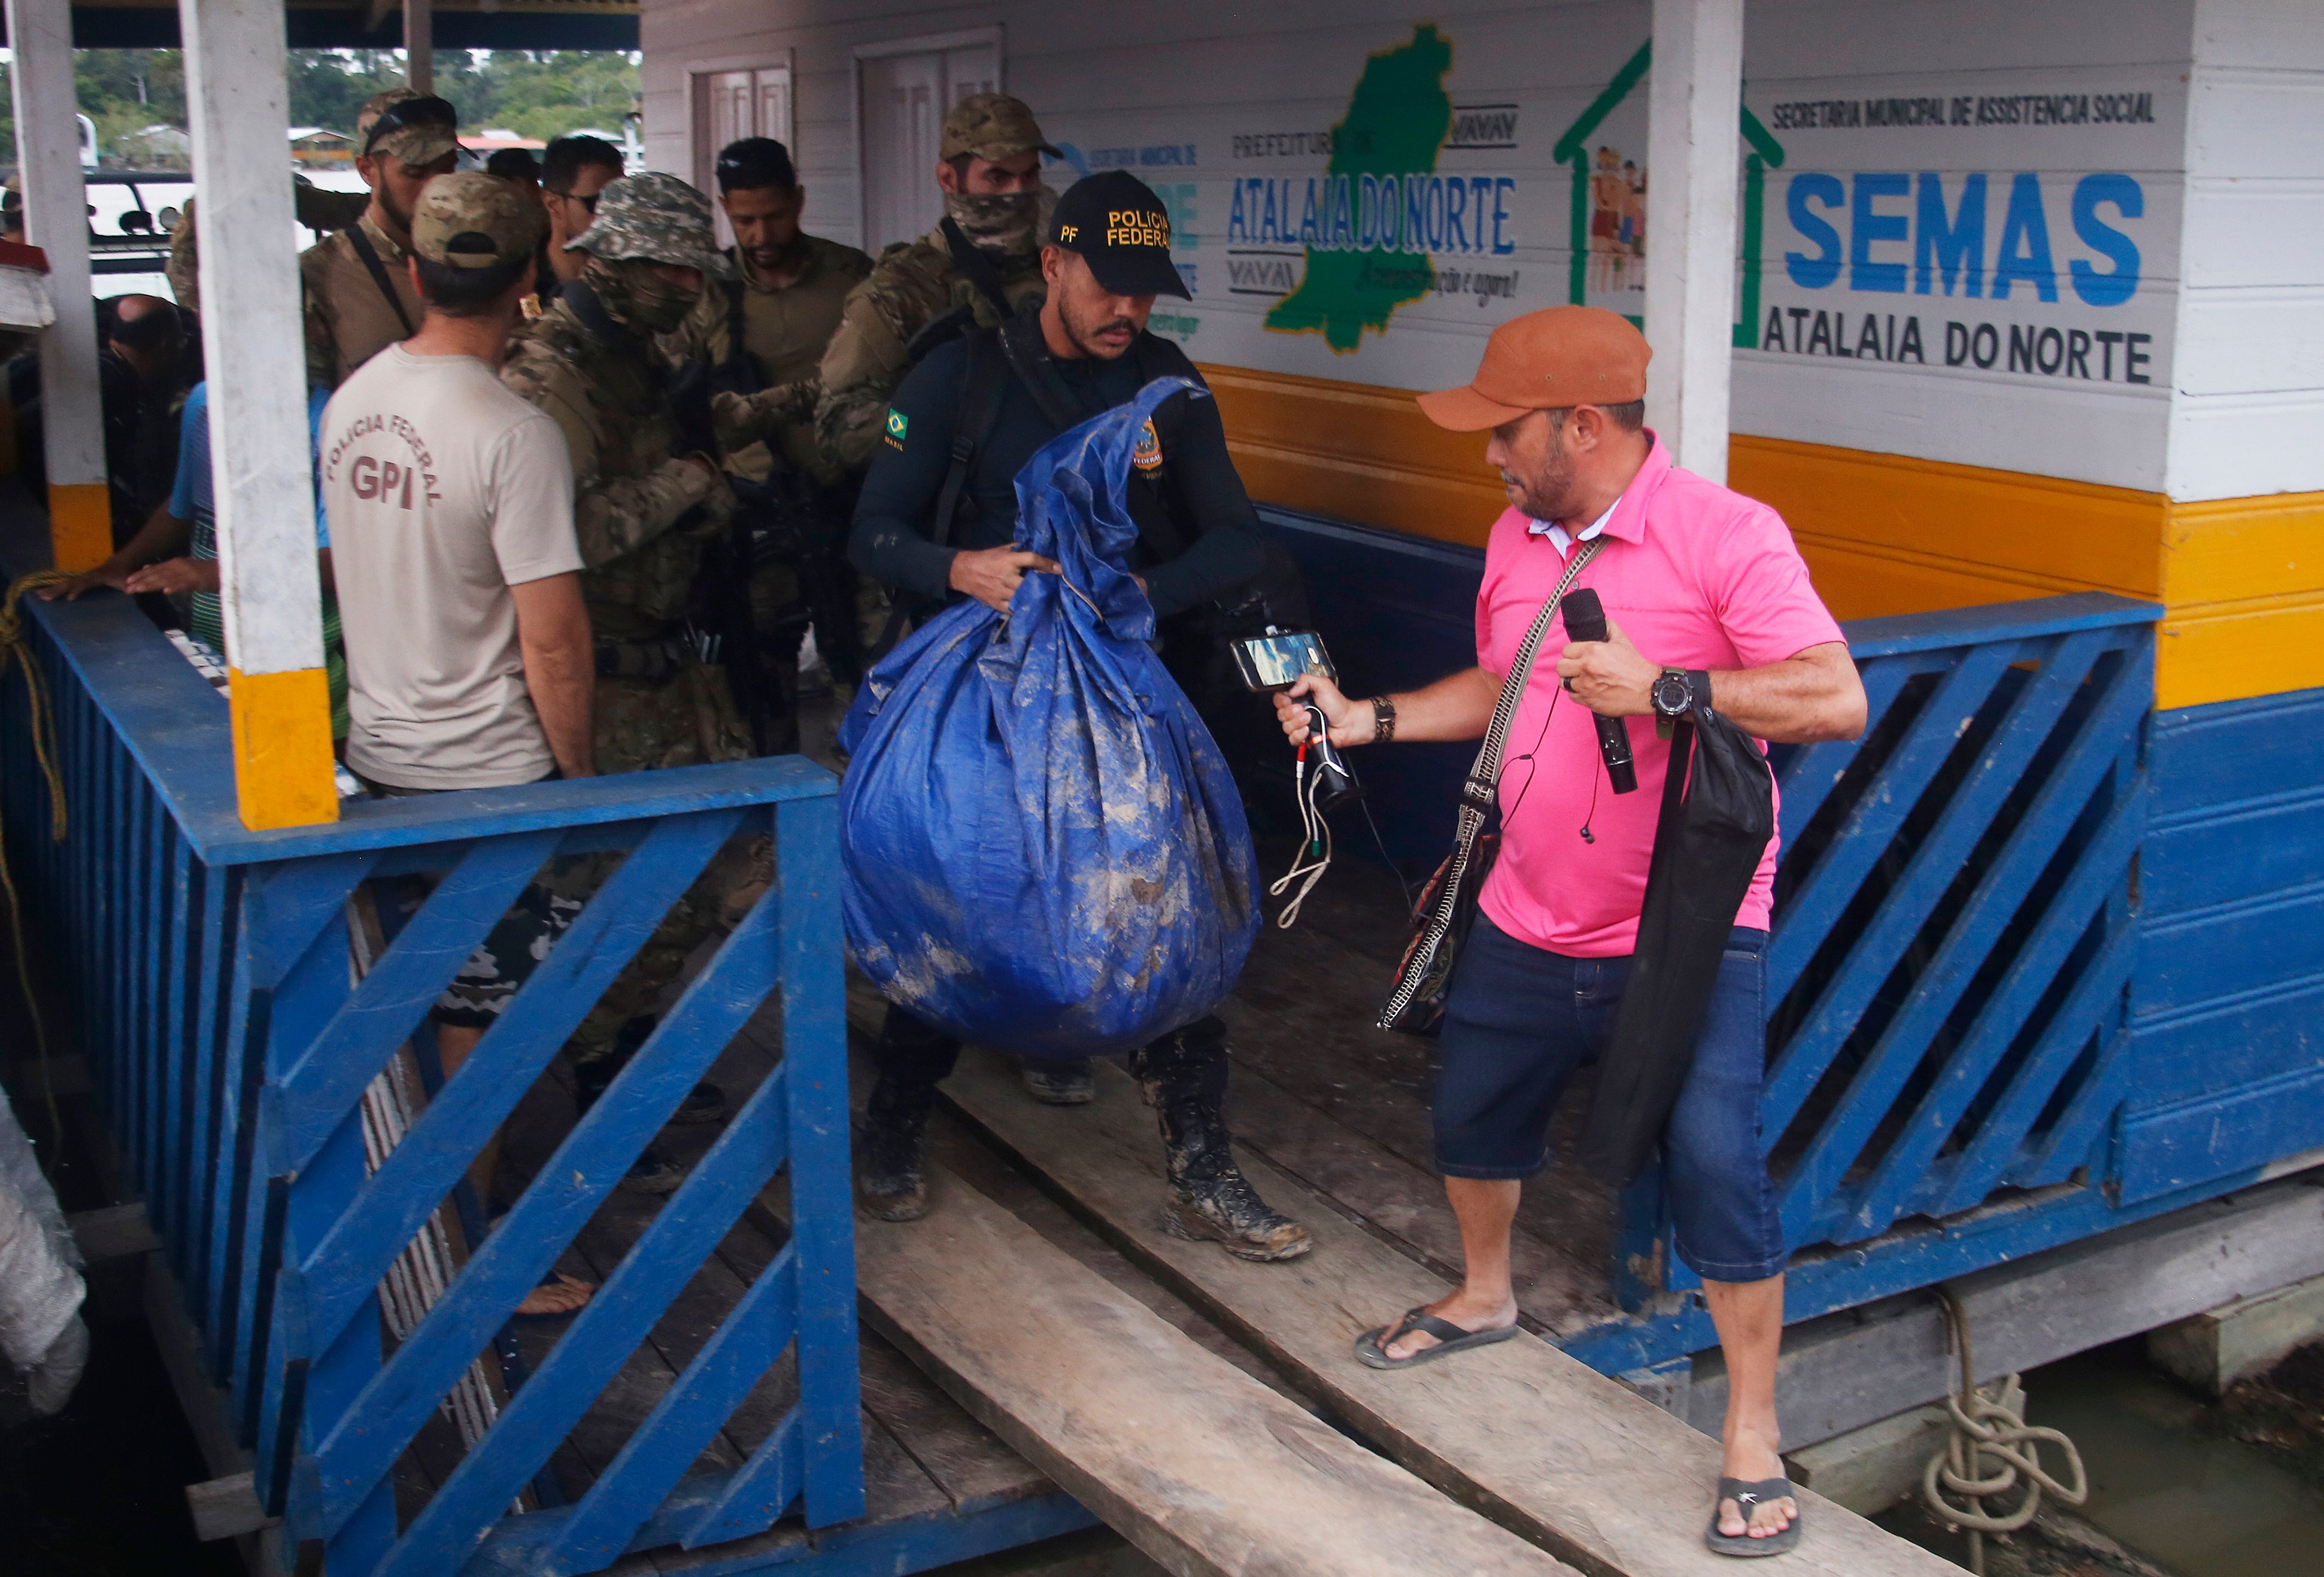 A police officer carries a bag containing items recovered by a search party near Atalaia do Norte